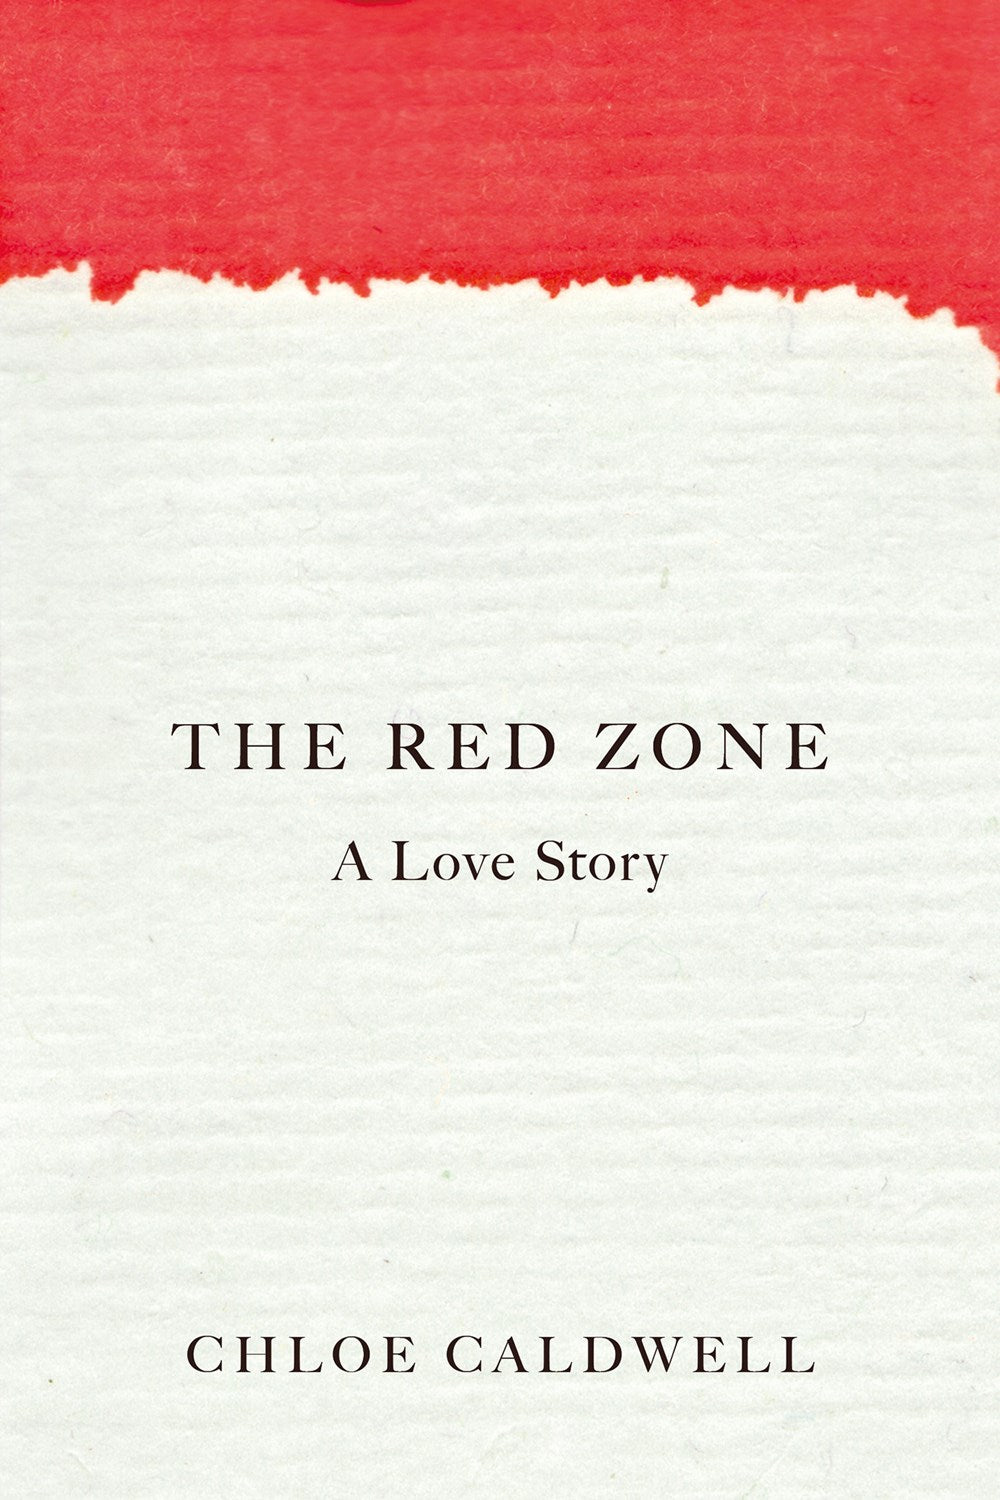 The Red Zone: A Love Story by Chloe Caldwell